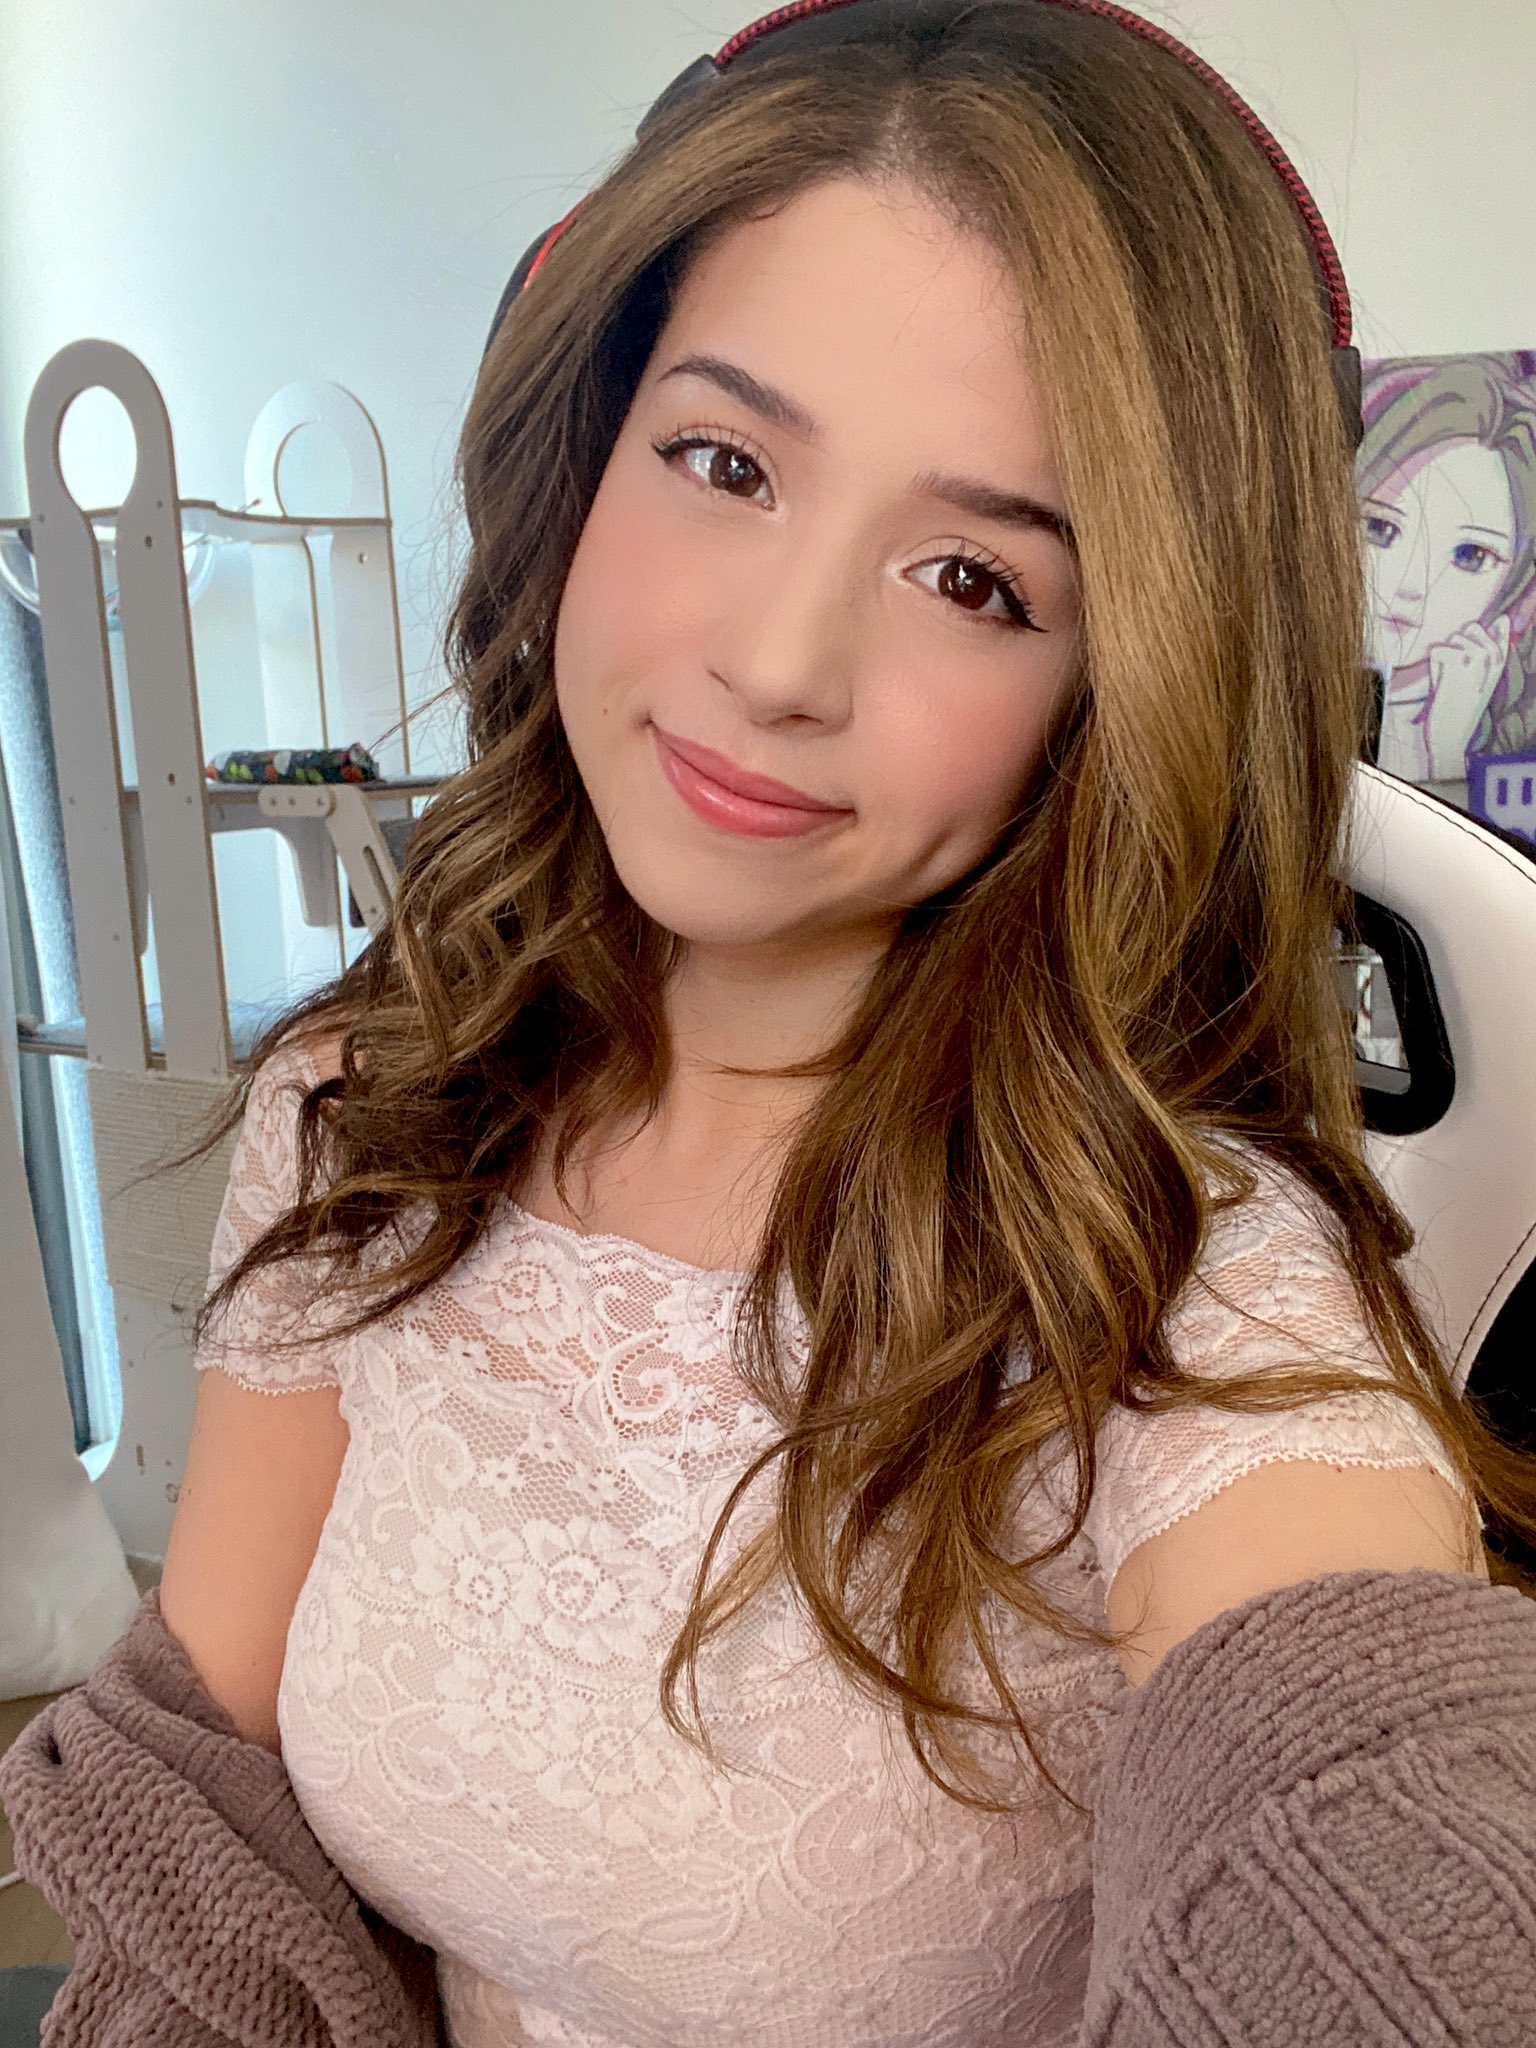 Fitz and Pokimane find themselves in drama on Reddit.